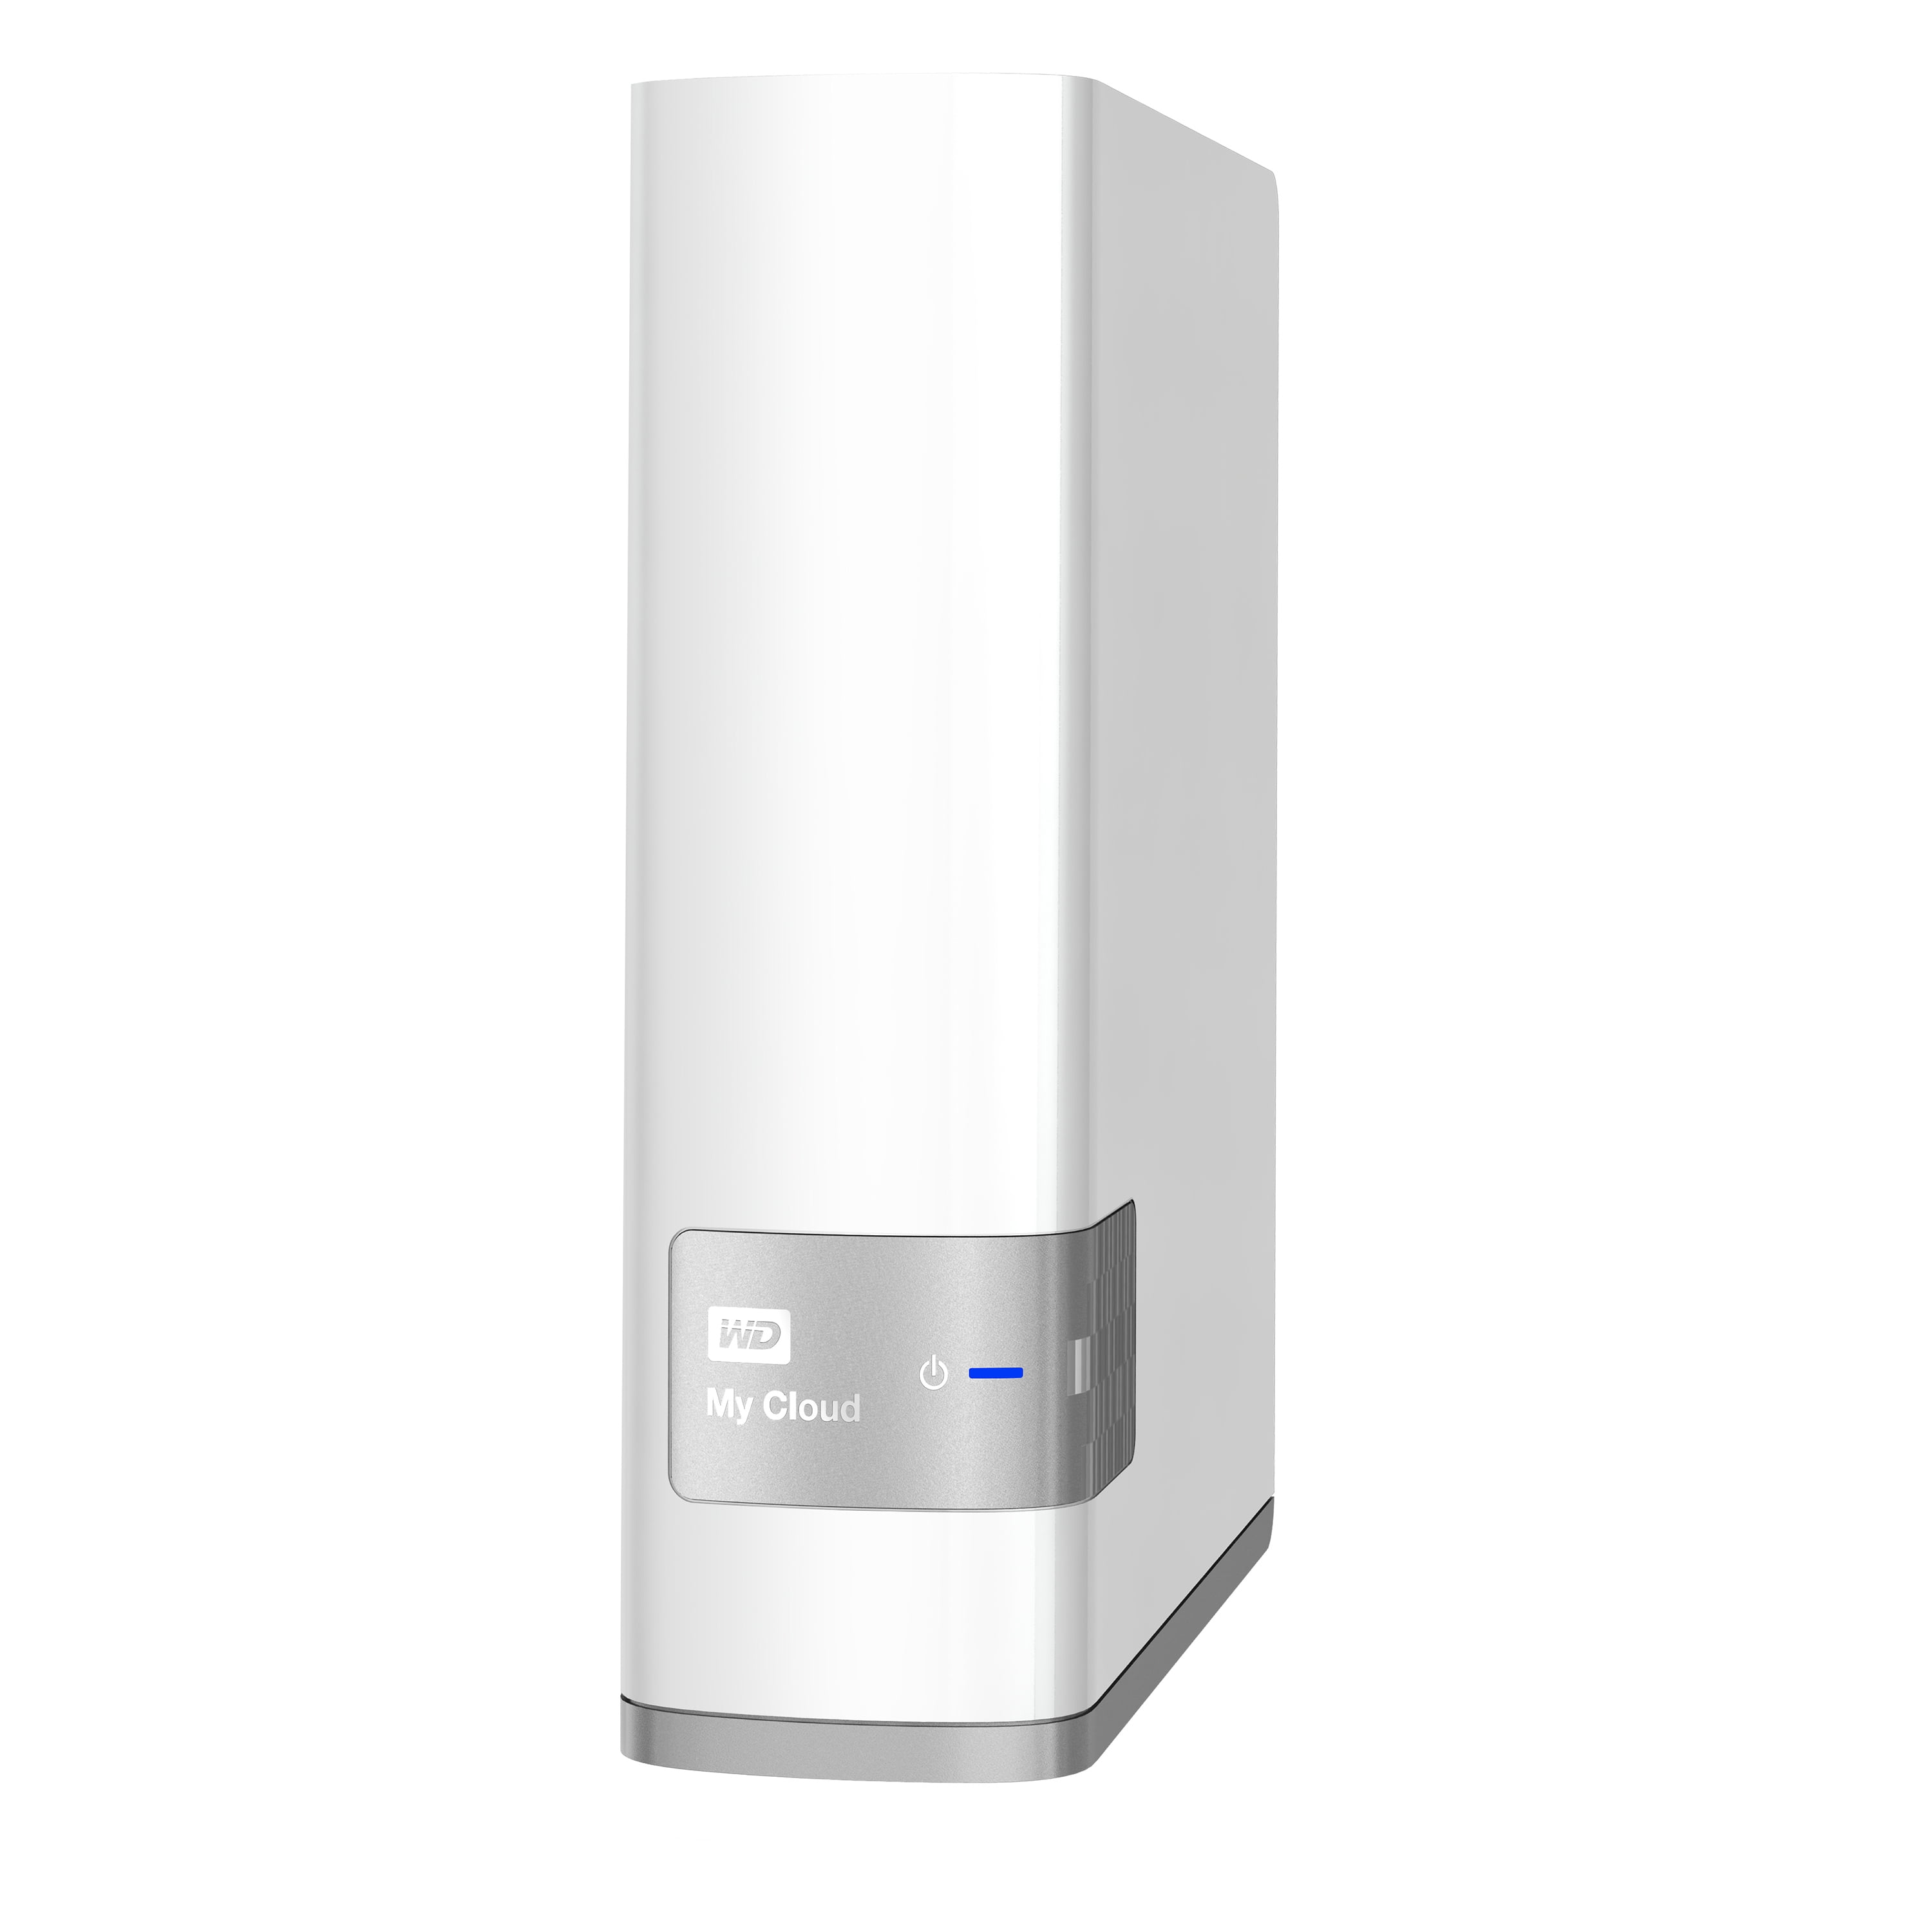 WD 2TB My Cloud Personal Network Attached Storage - NAS - WDBCTL0020HWT-NESN